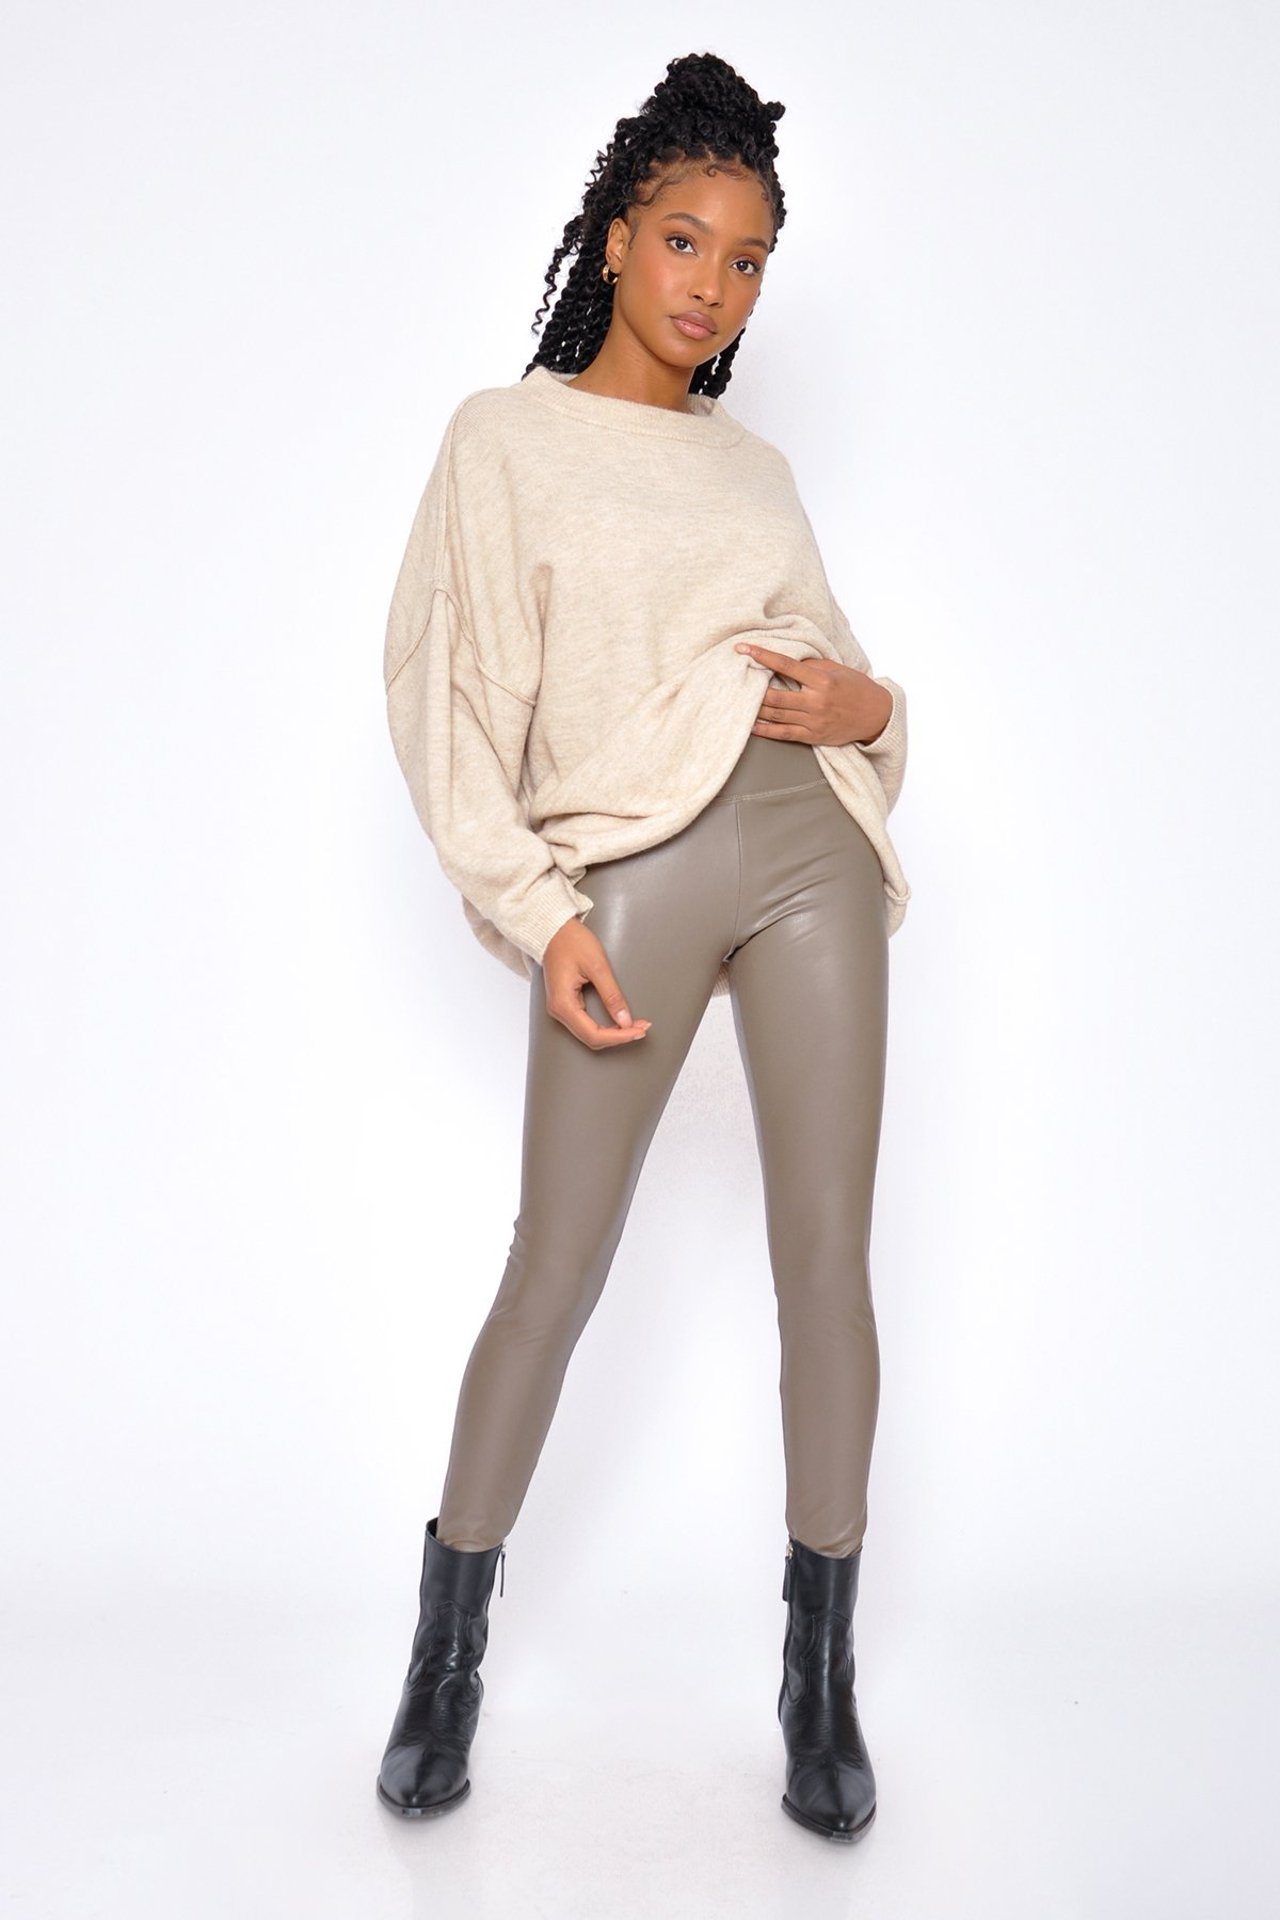 Woman wearing nude coloured leather pants